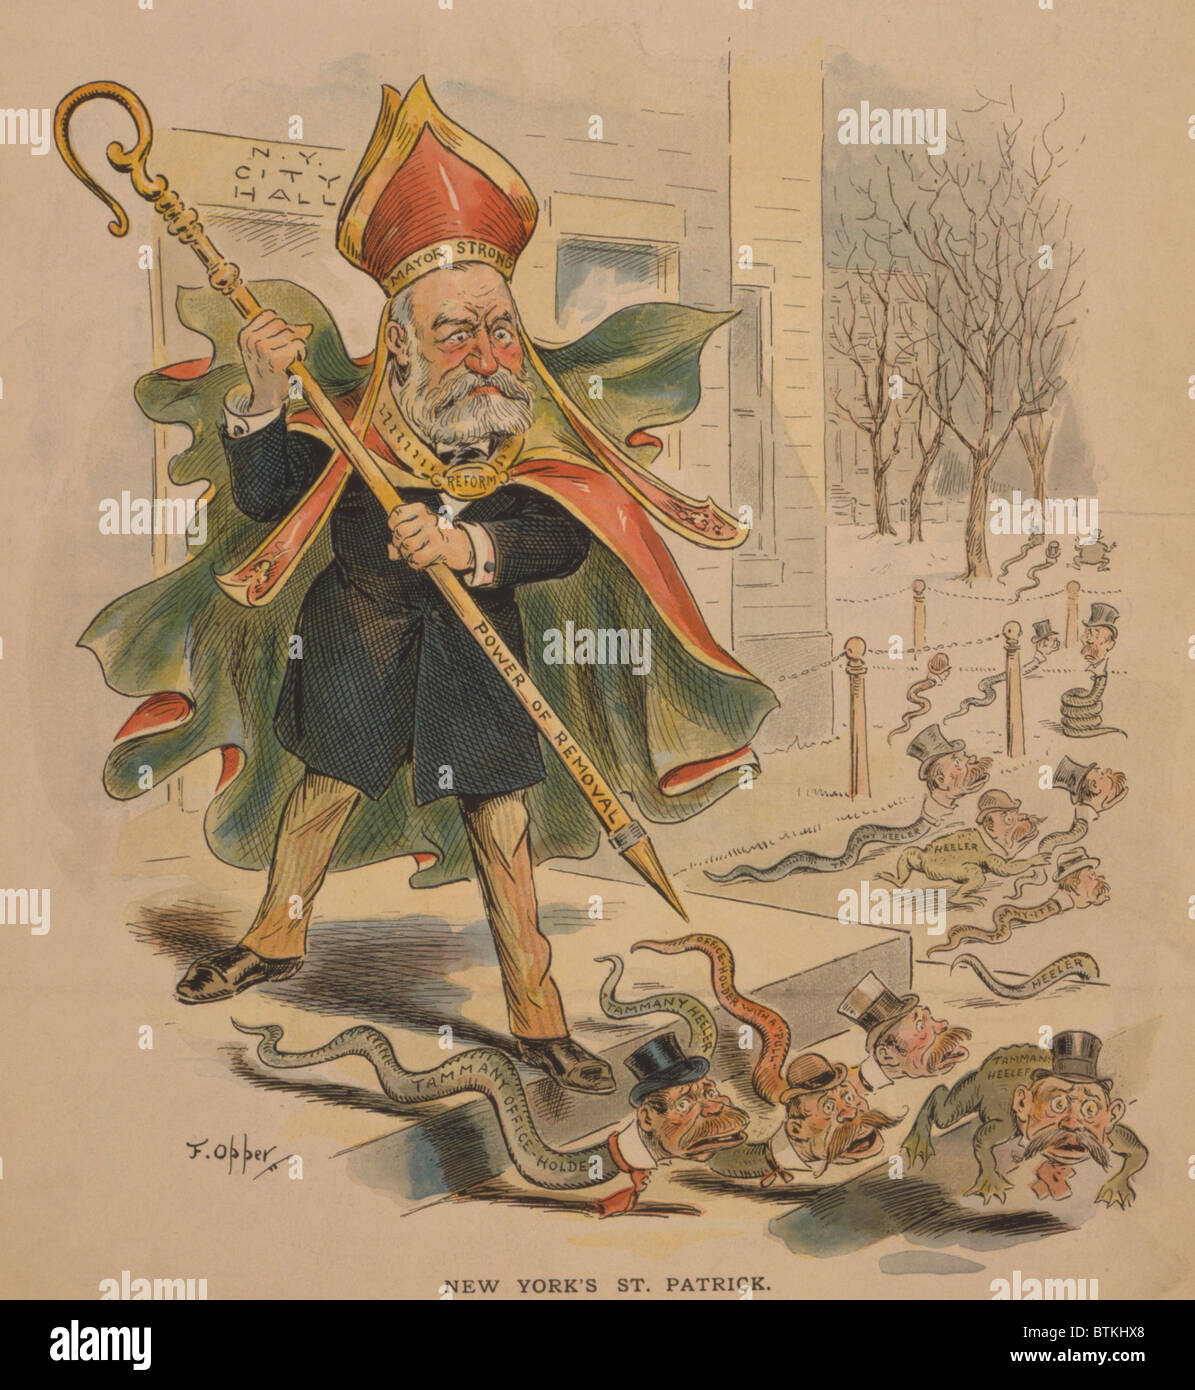 1895 political cartoon of New York City's Mayor Strong, dressed as St. Patrick, driving snakes and frogs, representing Tammany Hall's immigrant political base, from N.Y. City Hall. William Lafayette Strong (1827- 1900) was the Mayor of New York from 1895 to 1897. He was a Republican who won the votes of the anti-Tammany Democrats. Stock Photo